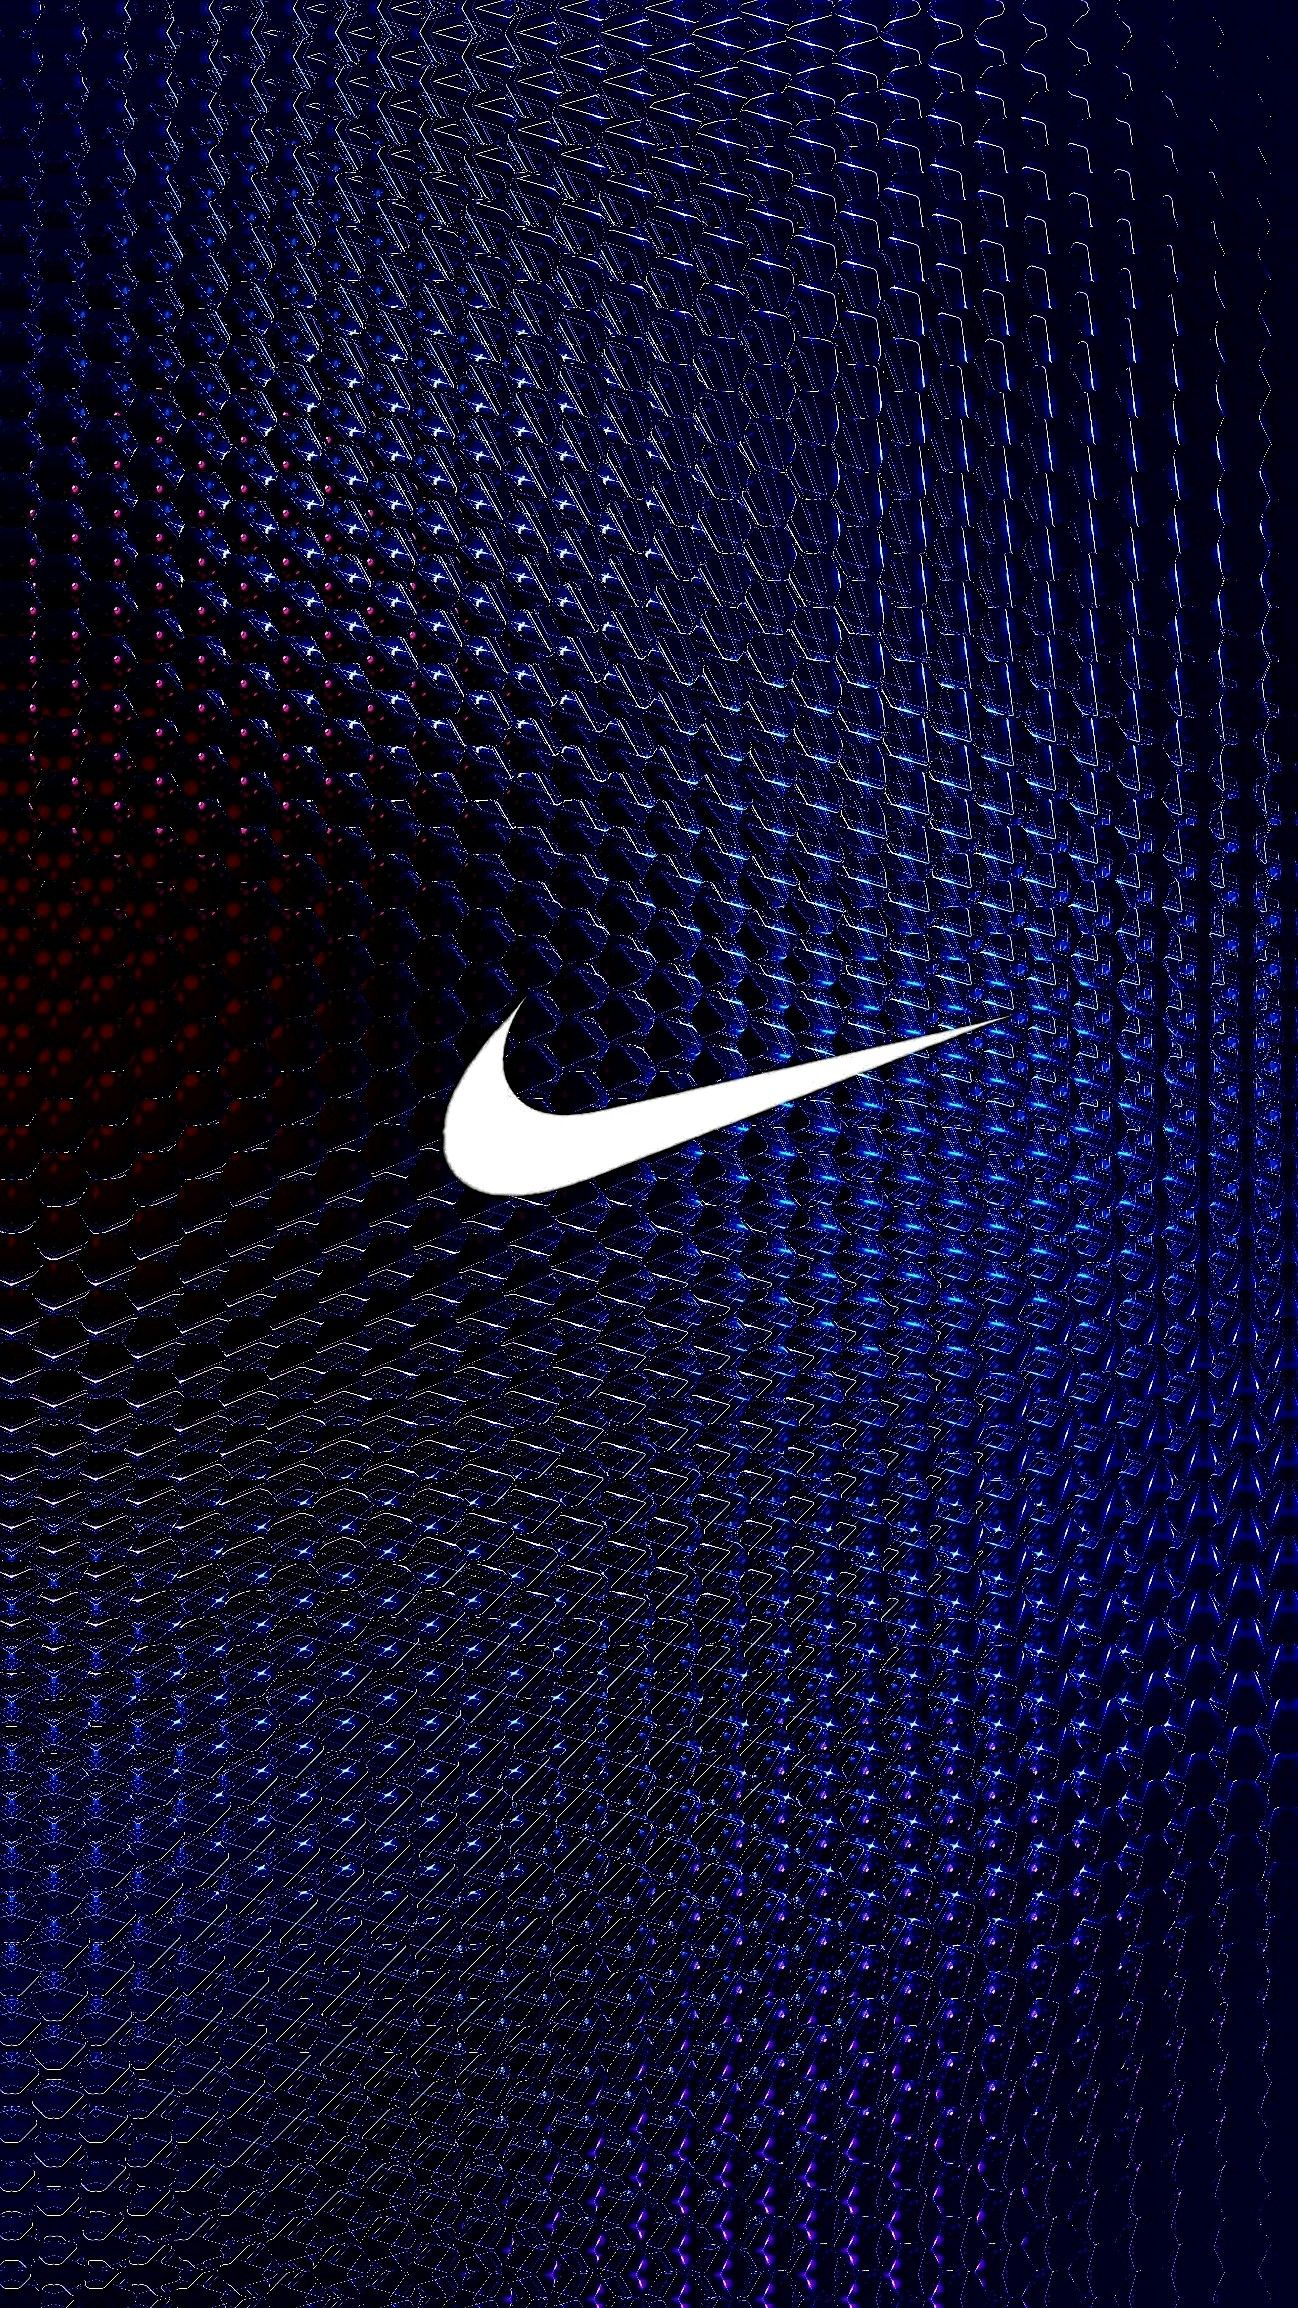 1298x2308 Pin by Hooter's Konceptz on Nike wallpaper | Nike wallpaper, Nike logo wallpapers, Nike background